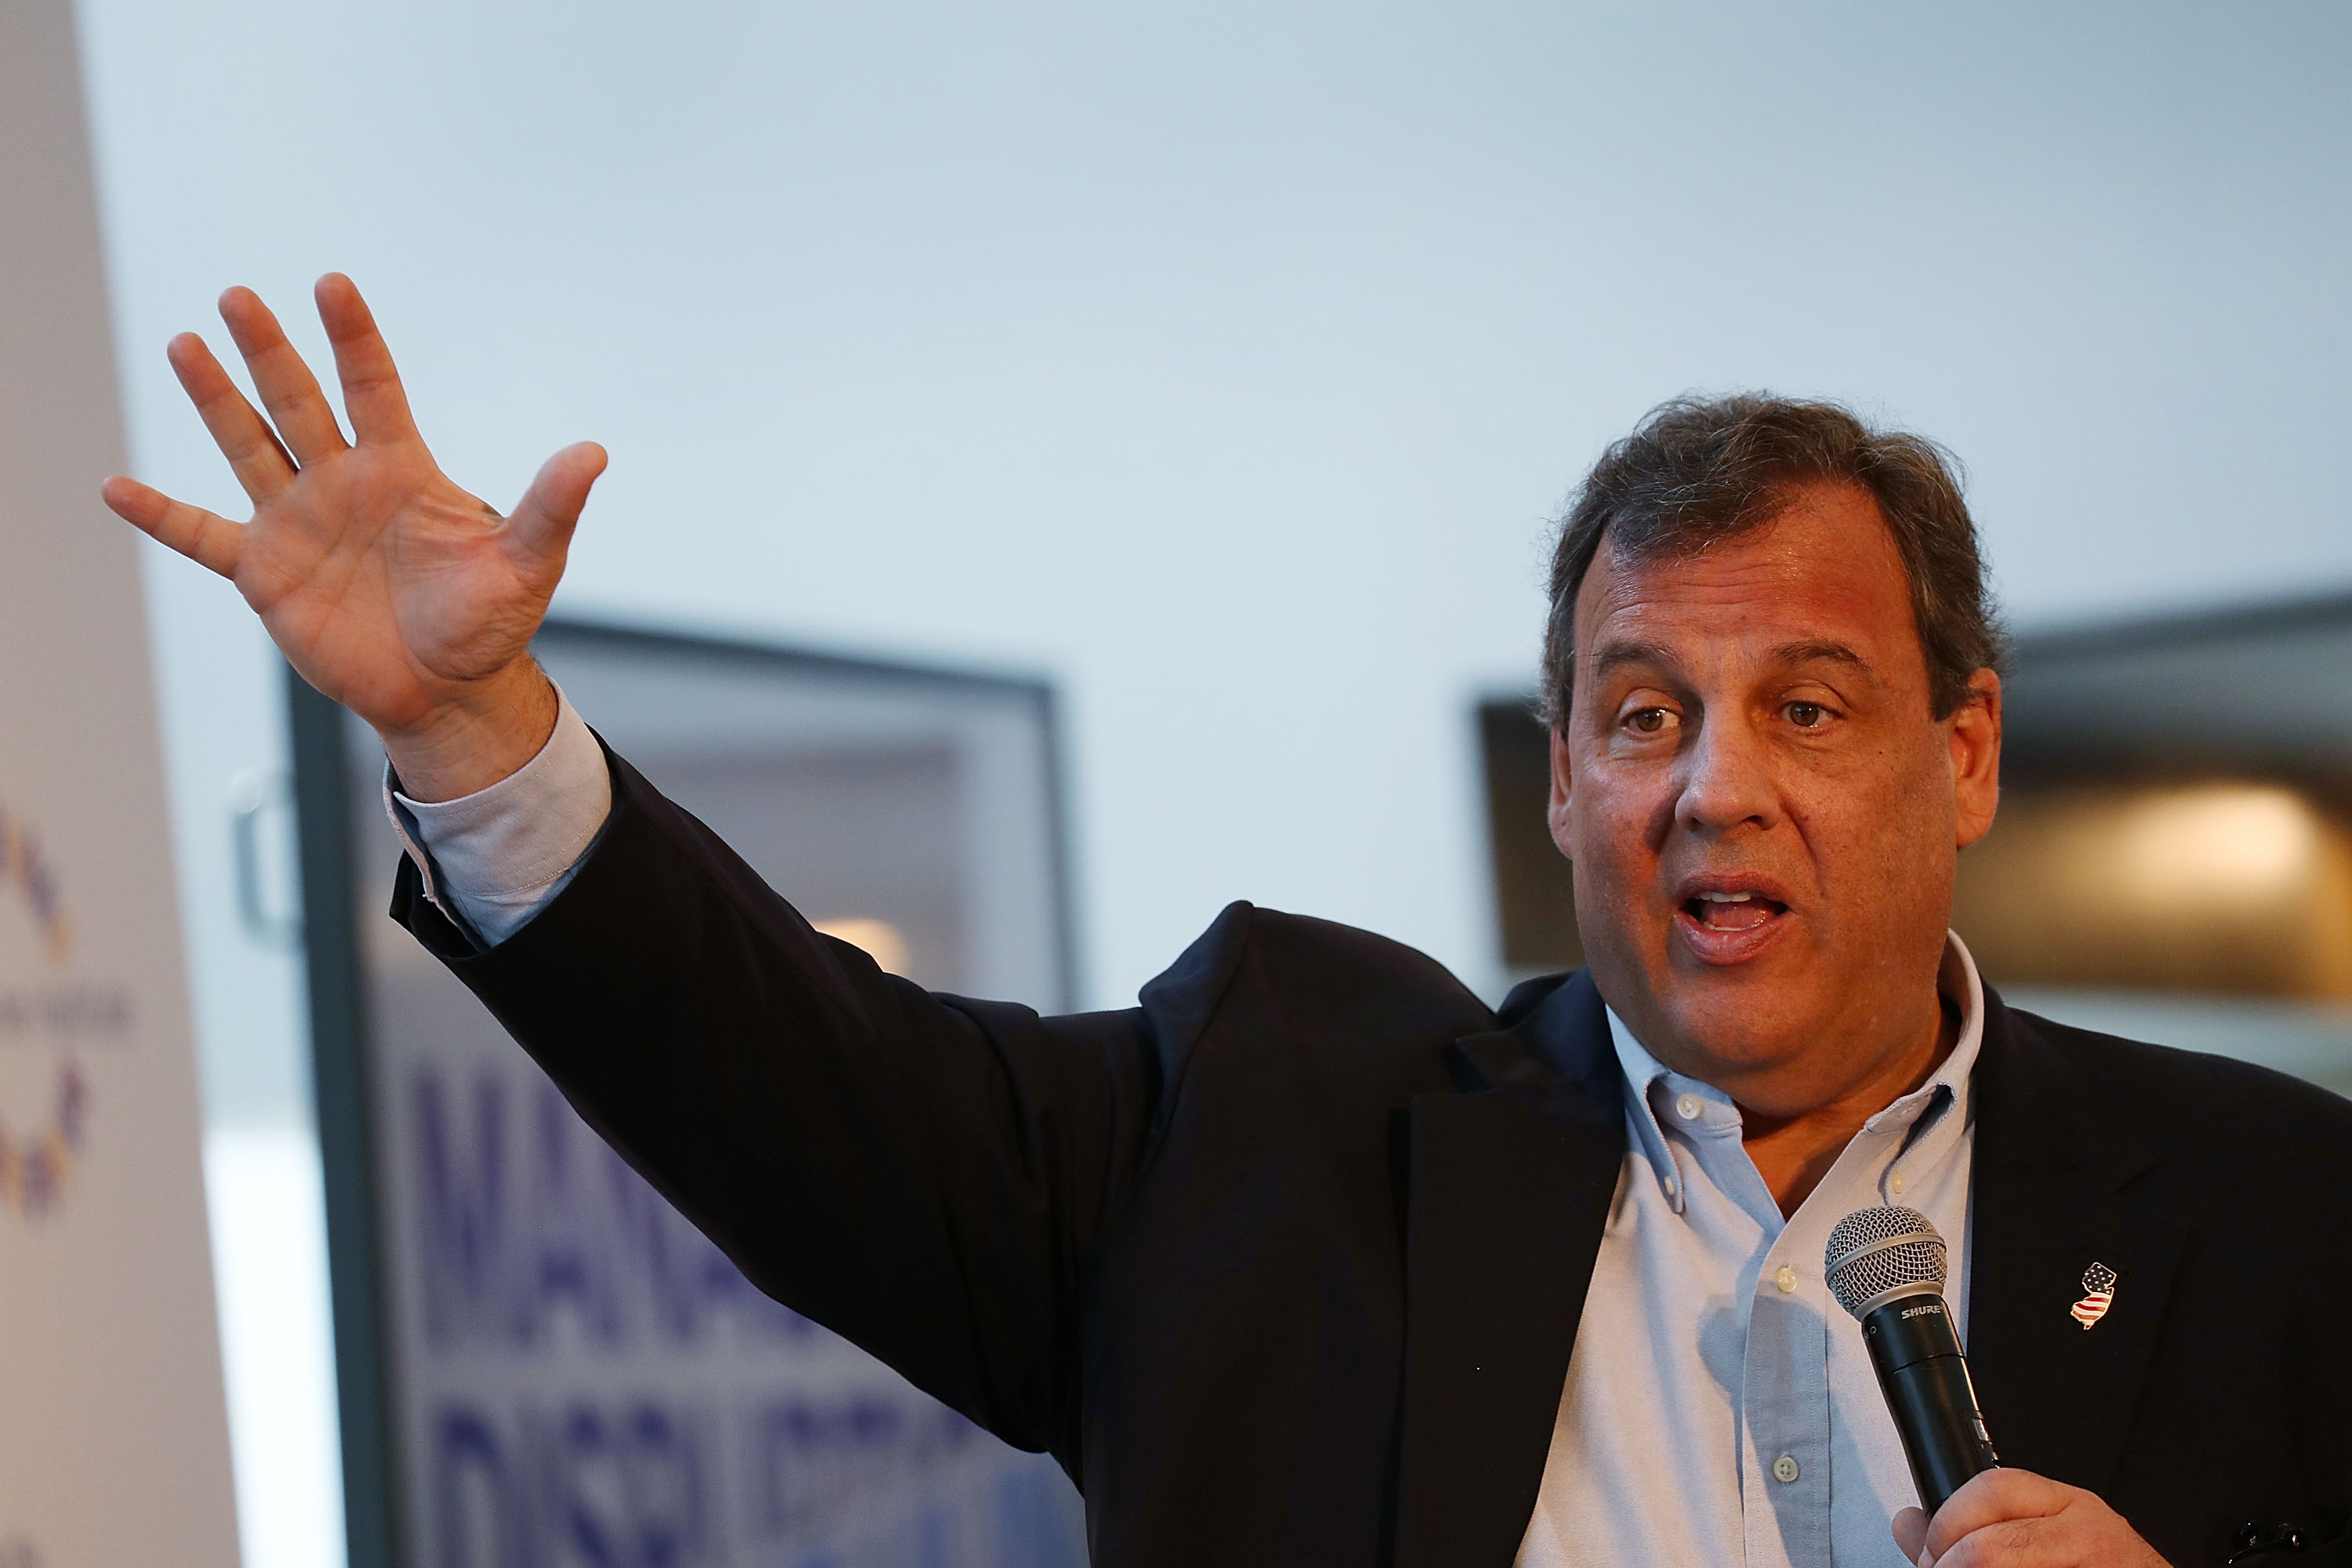 New Jersey Gov. Chris Christie speaks during the "Managing the Disruption" conference held at the Tideline Ocean Resort on April 3, 2017 in Palm Beach, Florida. (Joe Raedle/Getty Images)